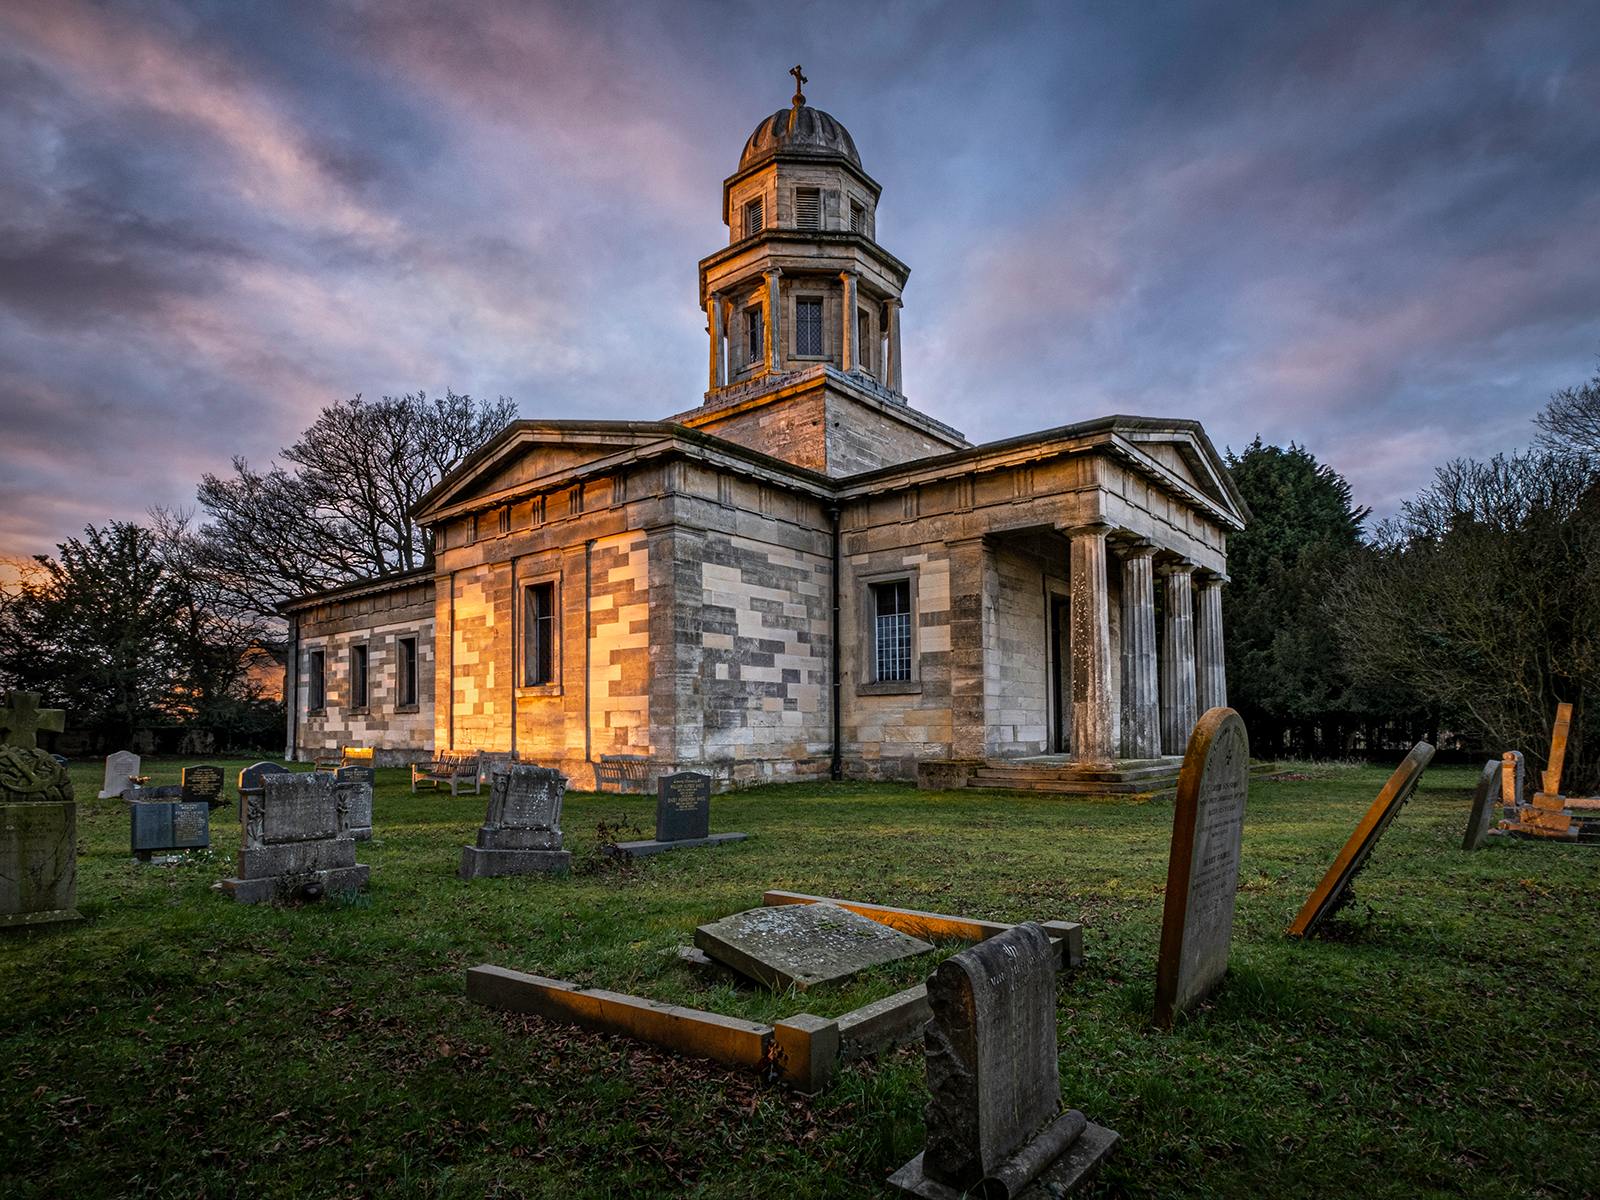 END OF THE DAY AT MILTON MAUSOLEUM by Lois Webb